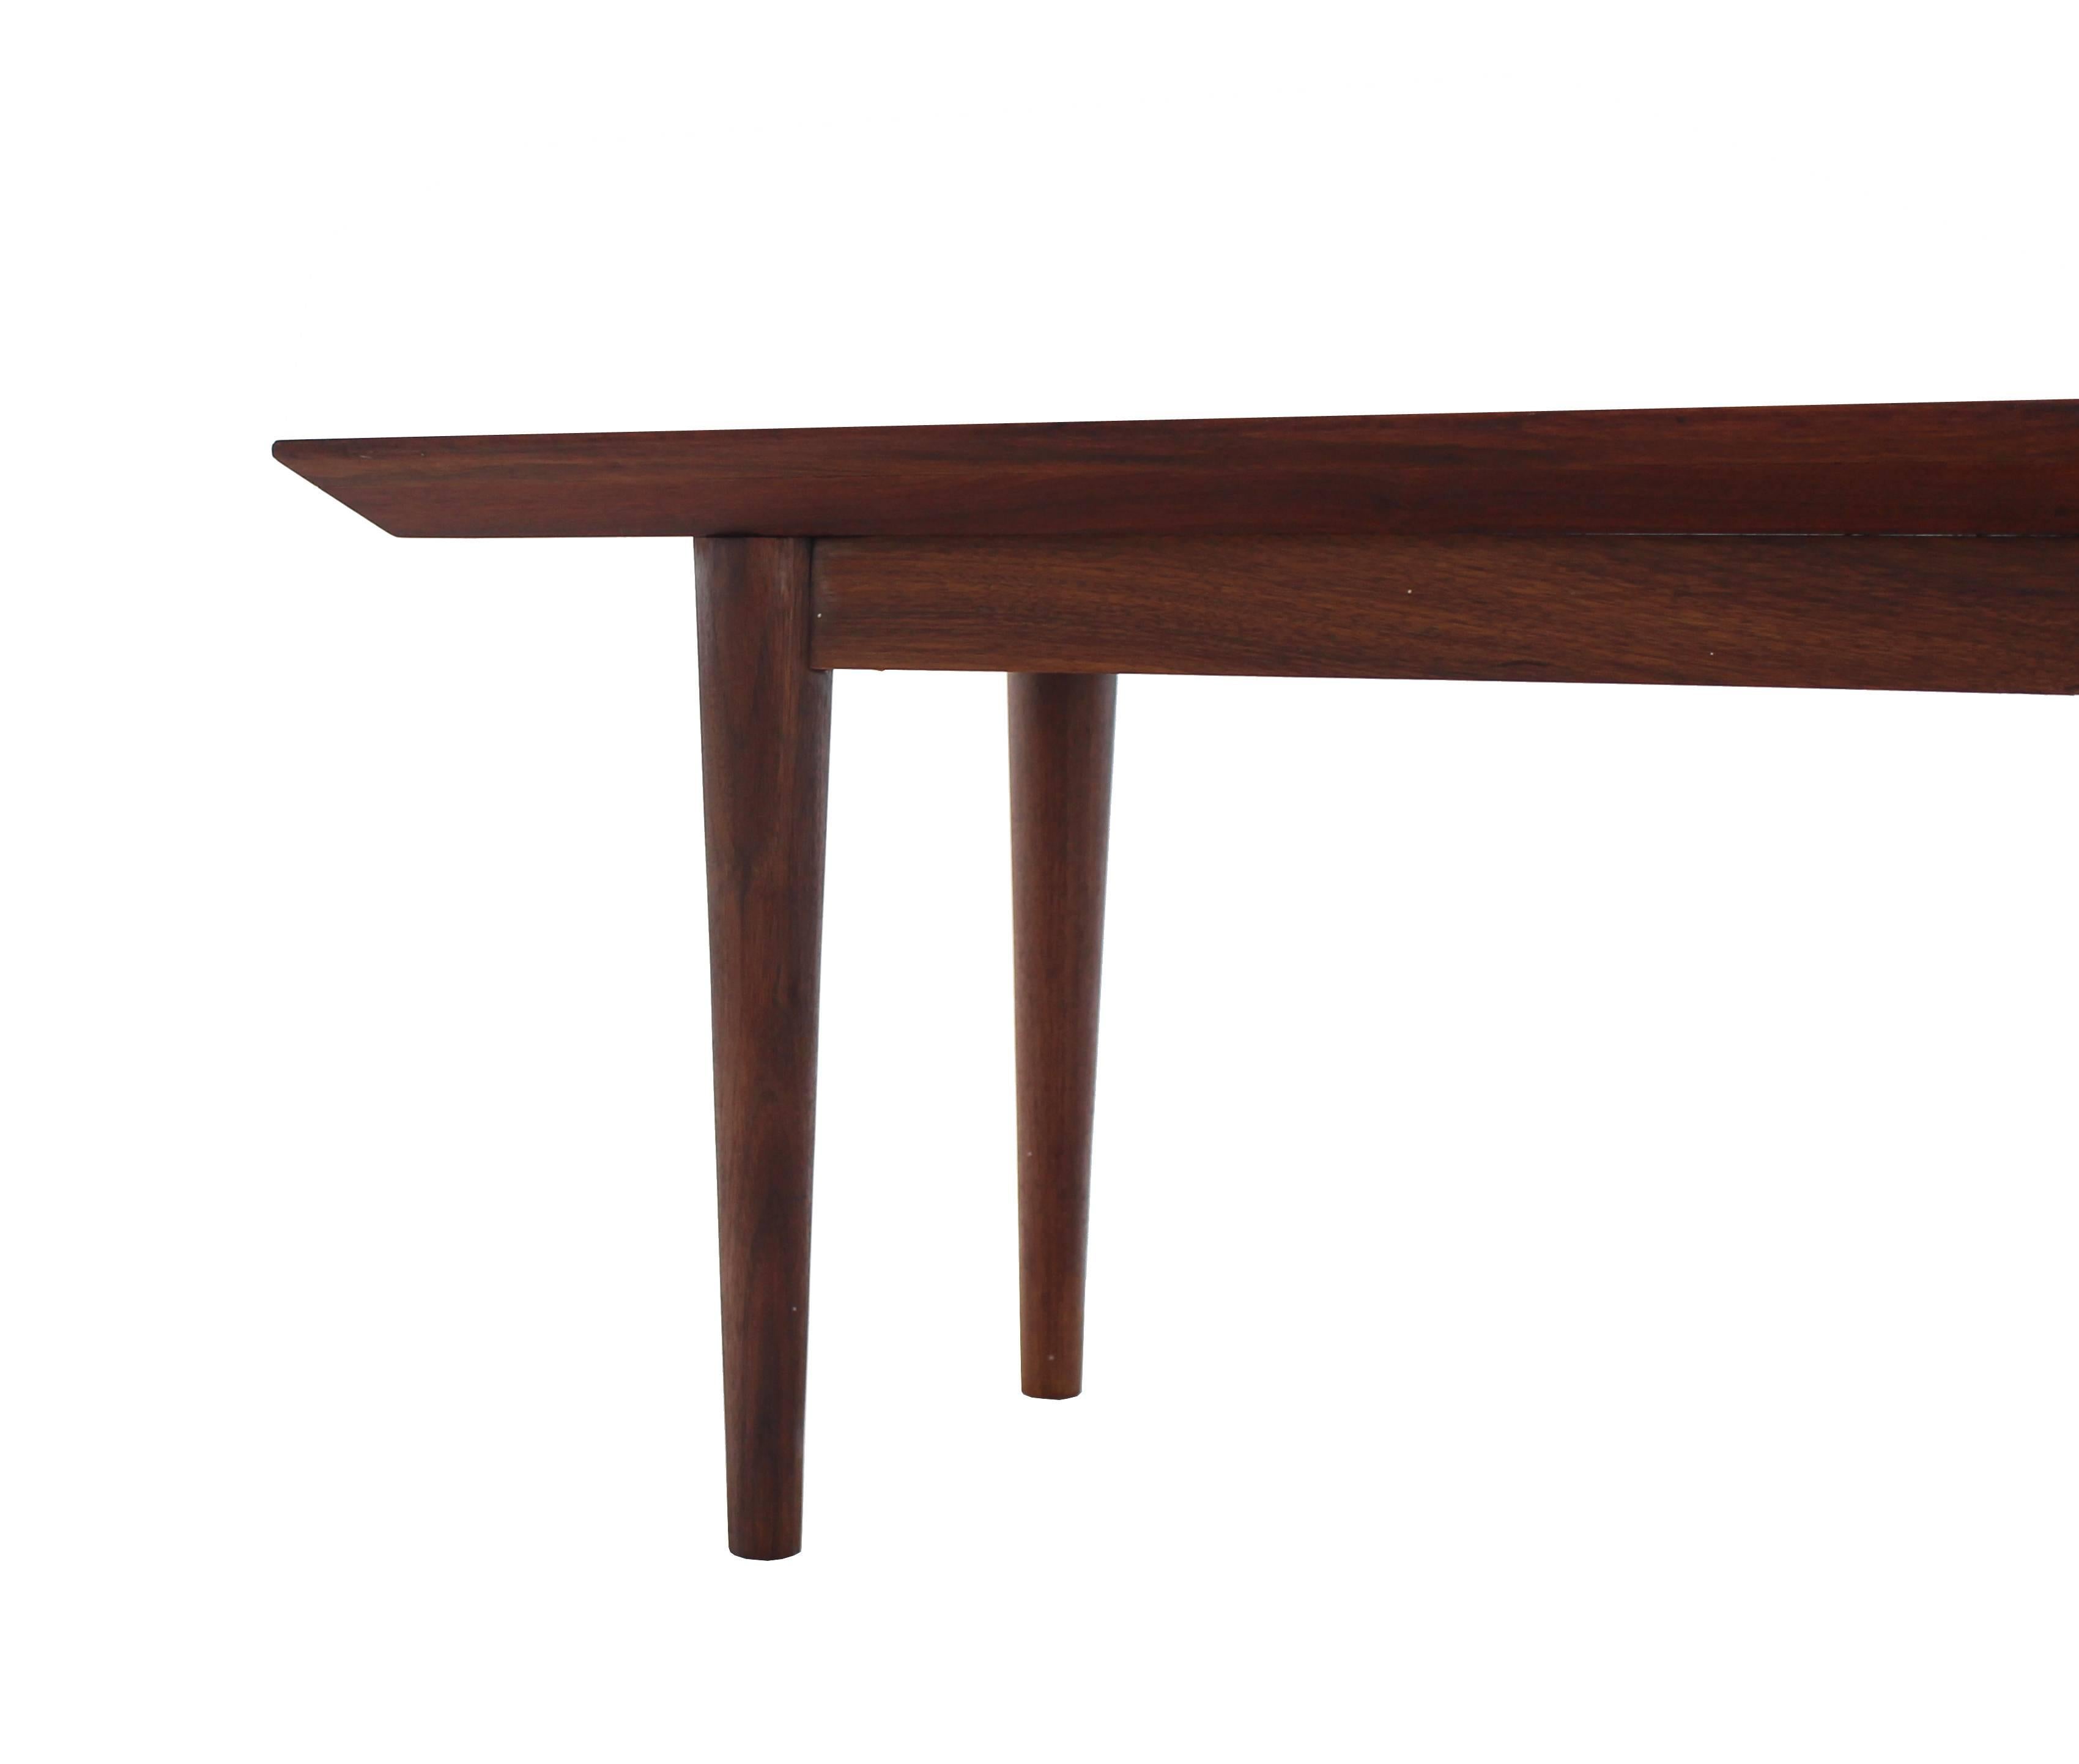 Rare Early Walnut Bench or Coffee Table by Risom For Sale 2